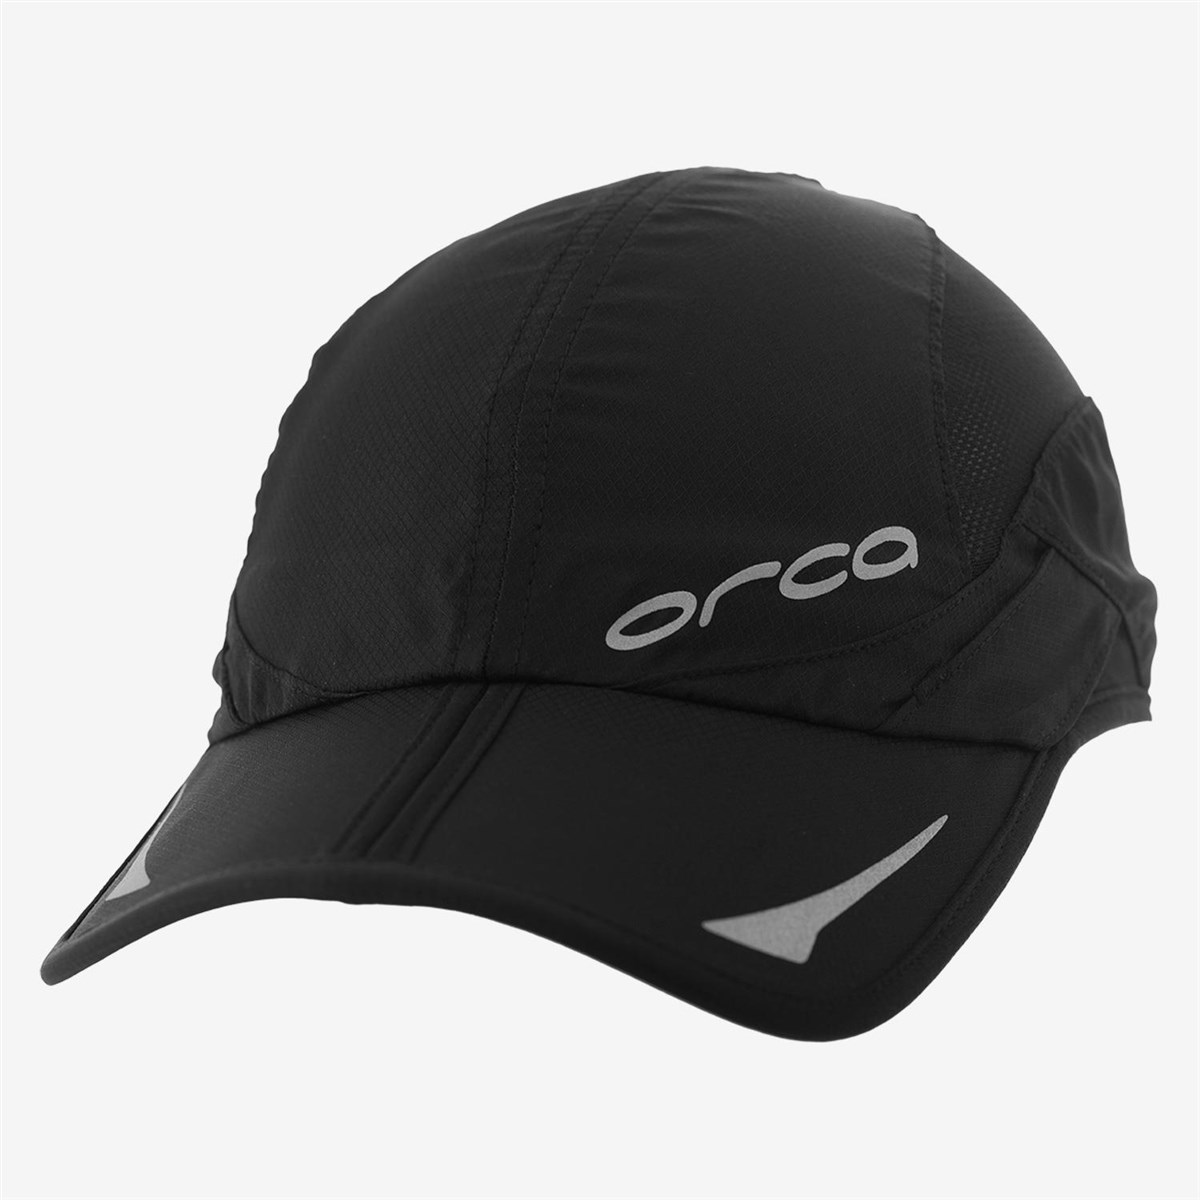 Orca Cap with Foldable System